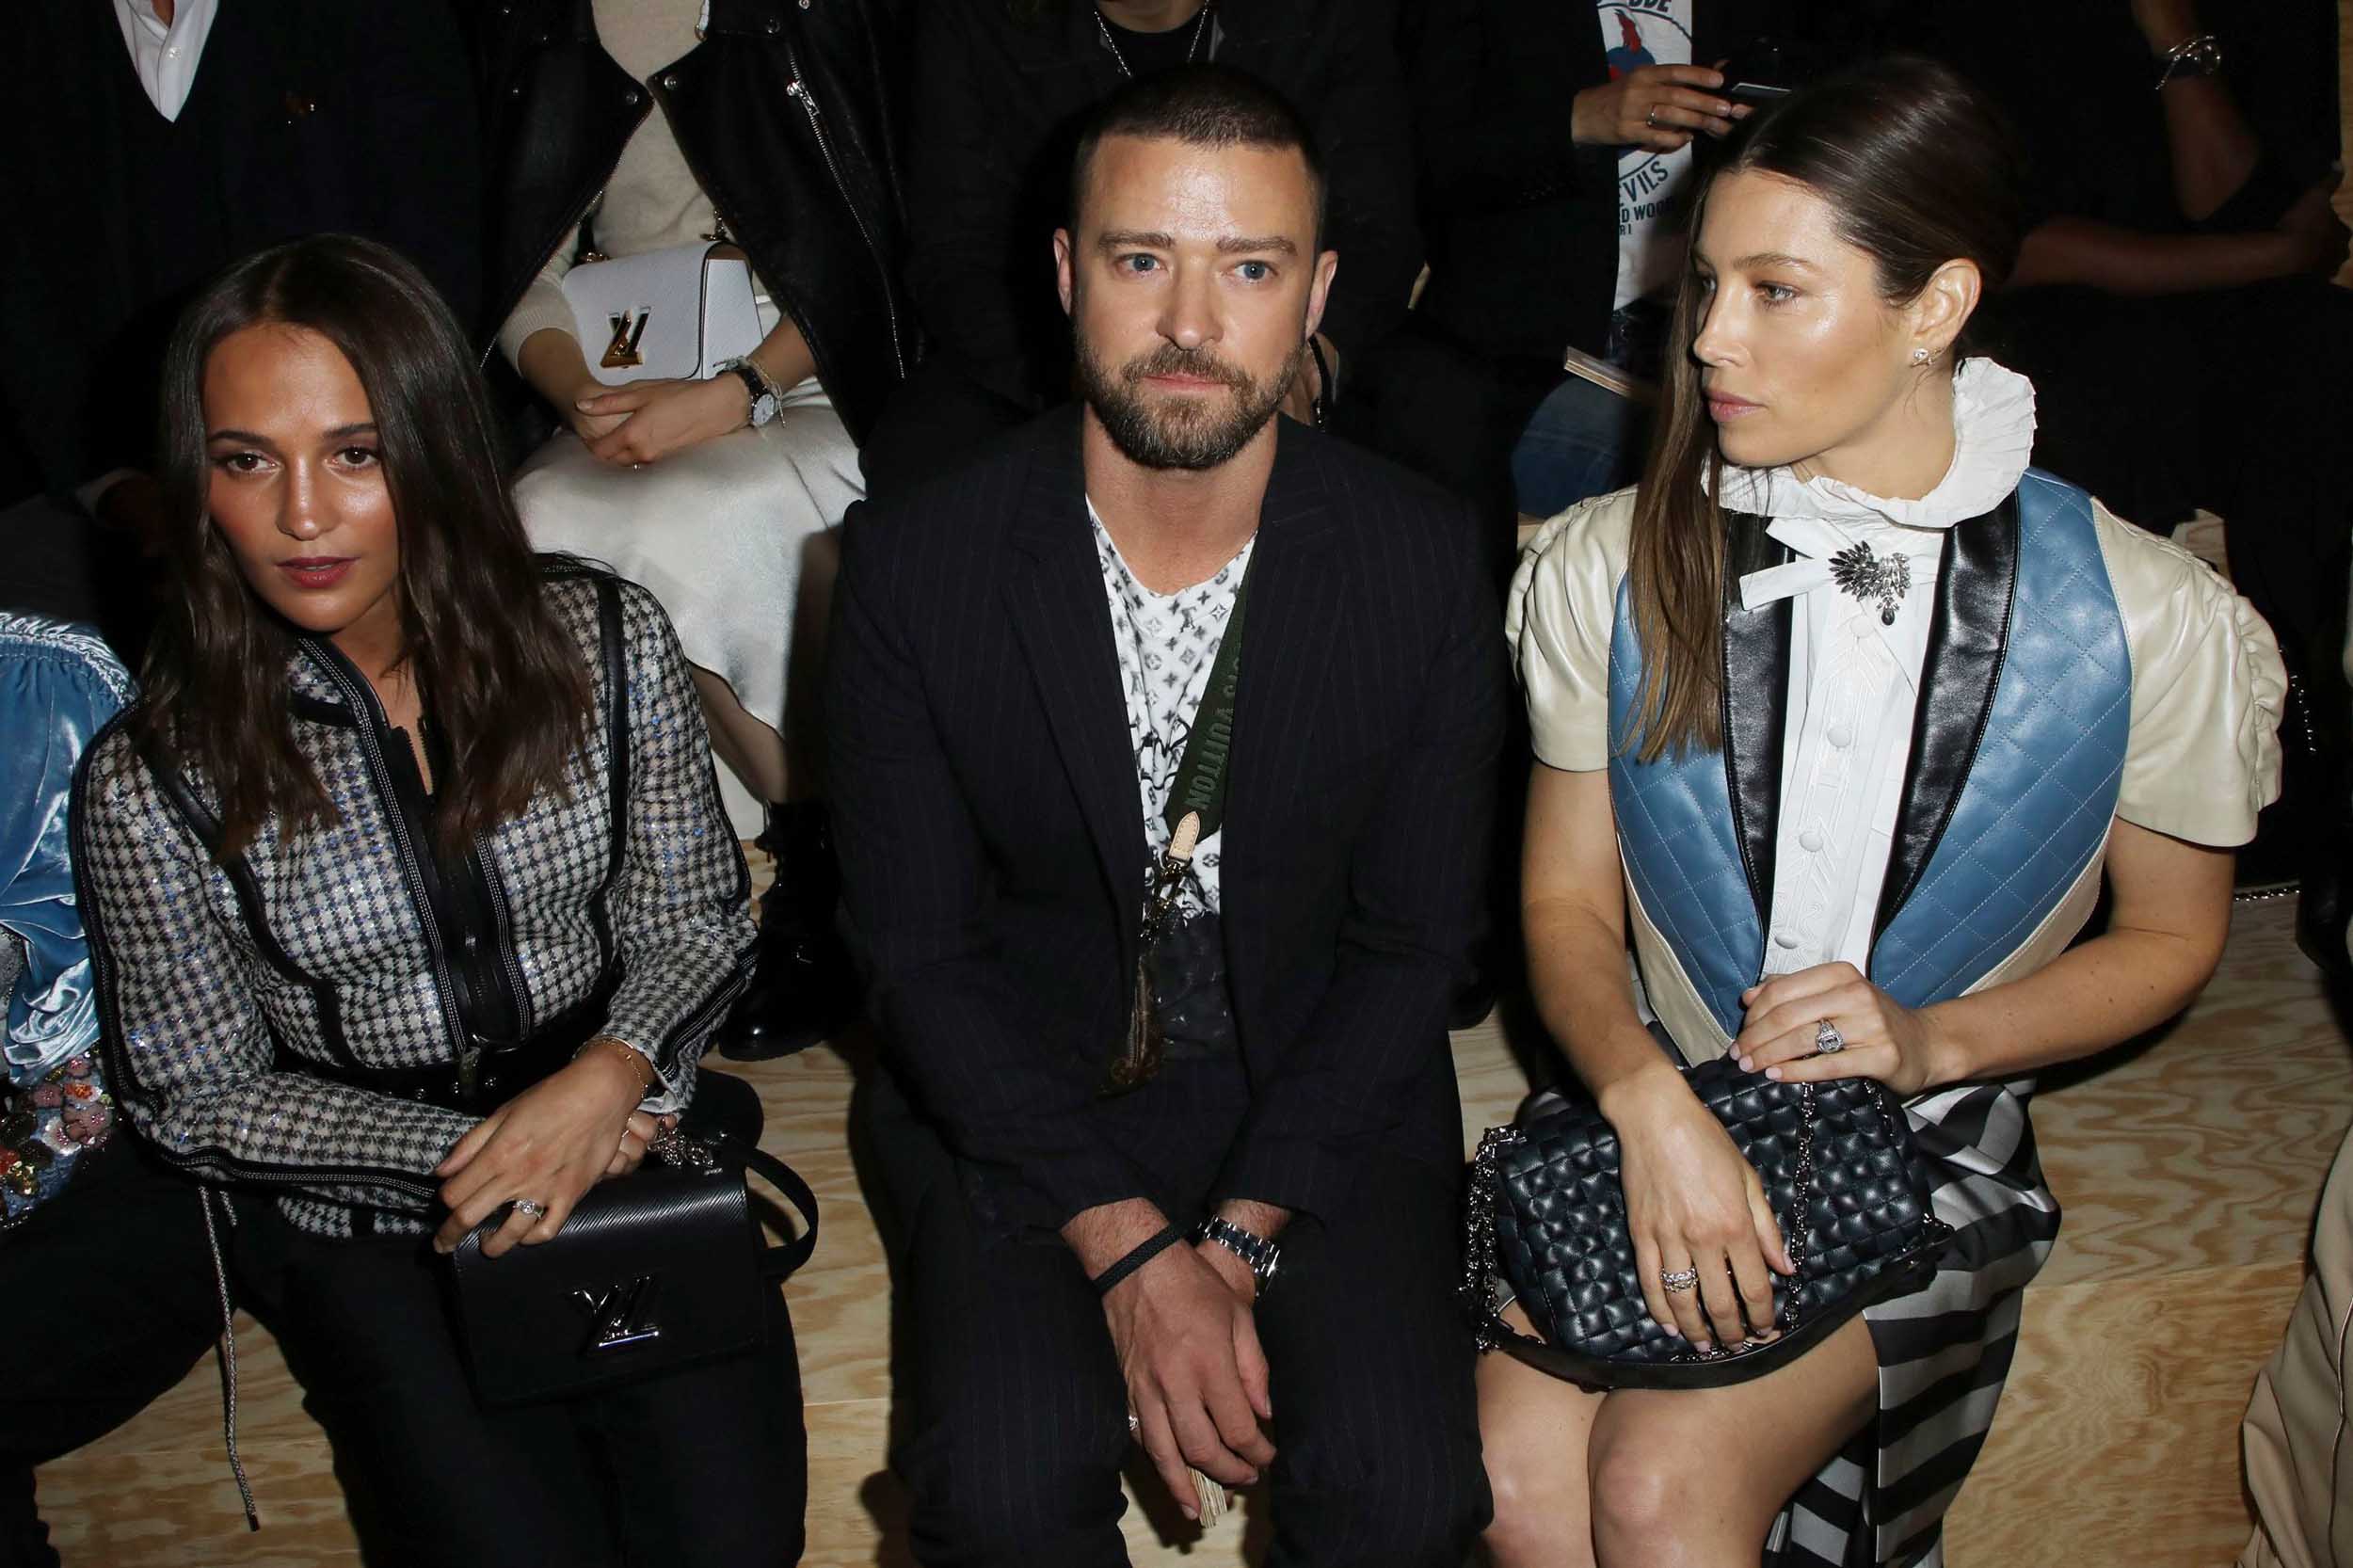 Justin Timberlake tries but fails to make up for his terrible dance moves  in wide-leg pants at Paris Fashion Week